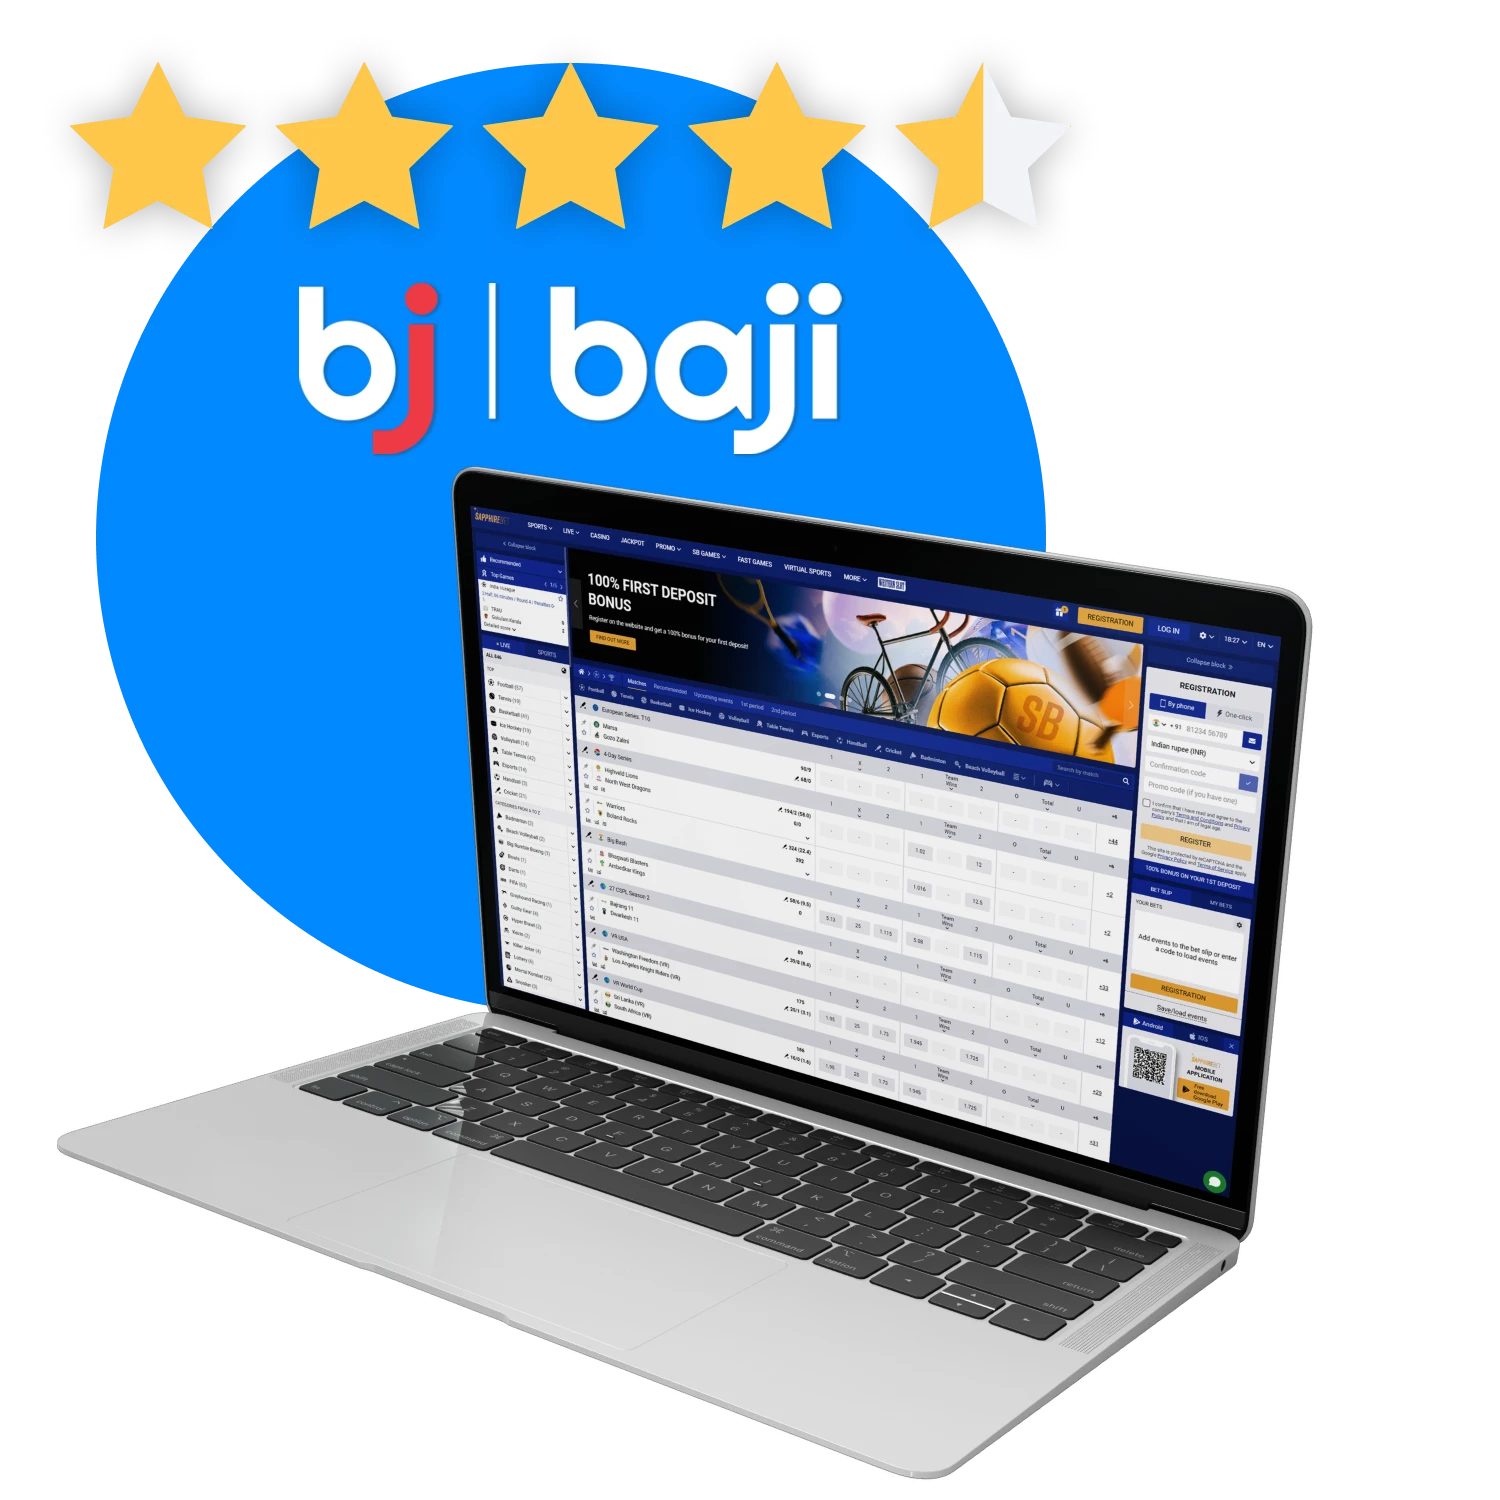 See what people are saying about the brand Baji.